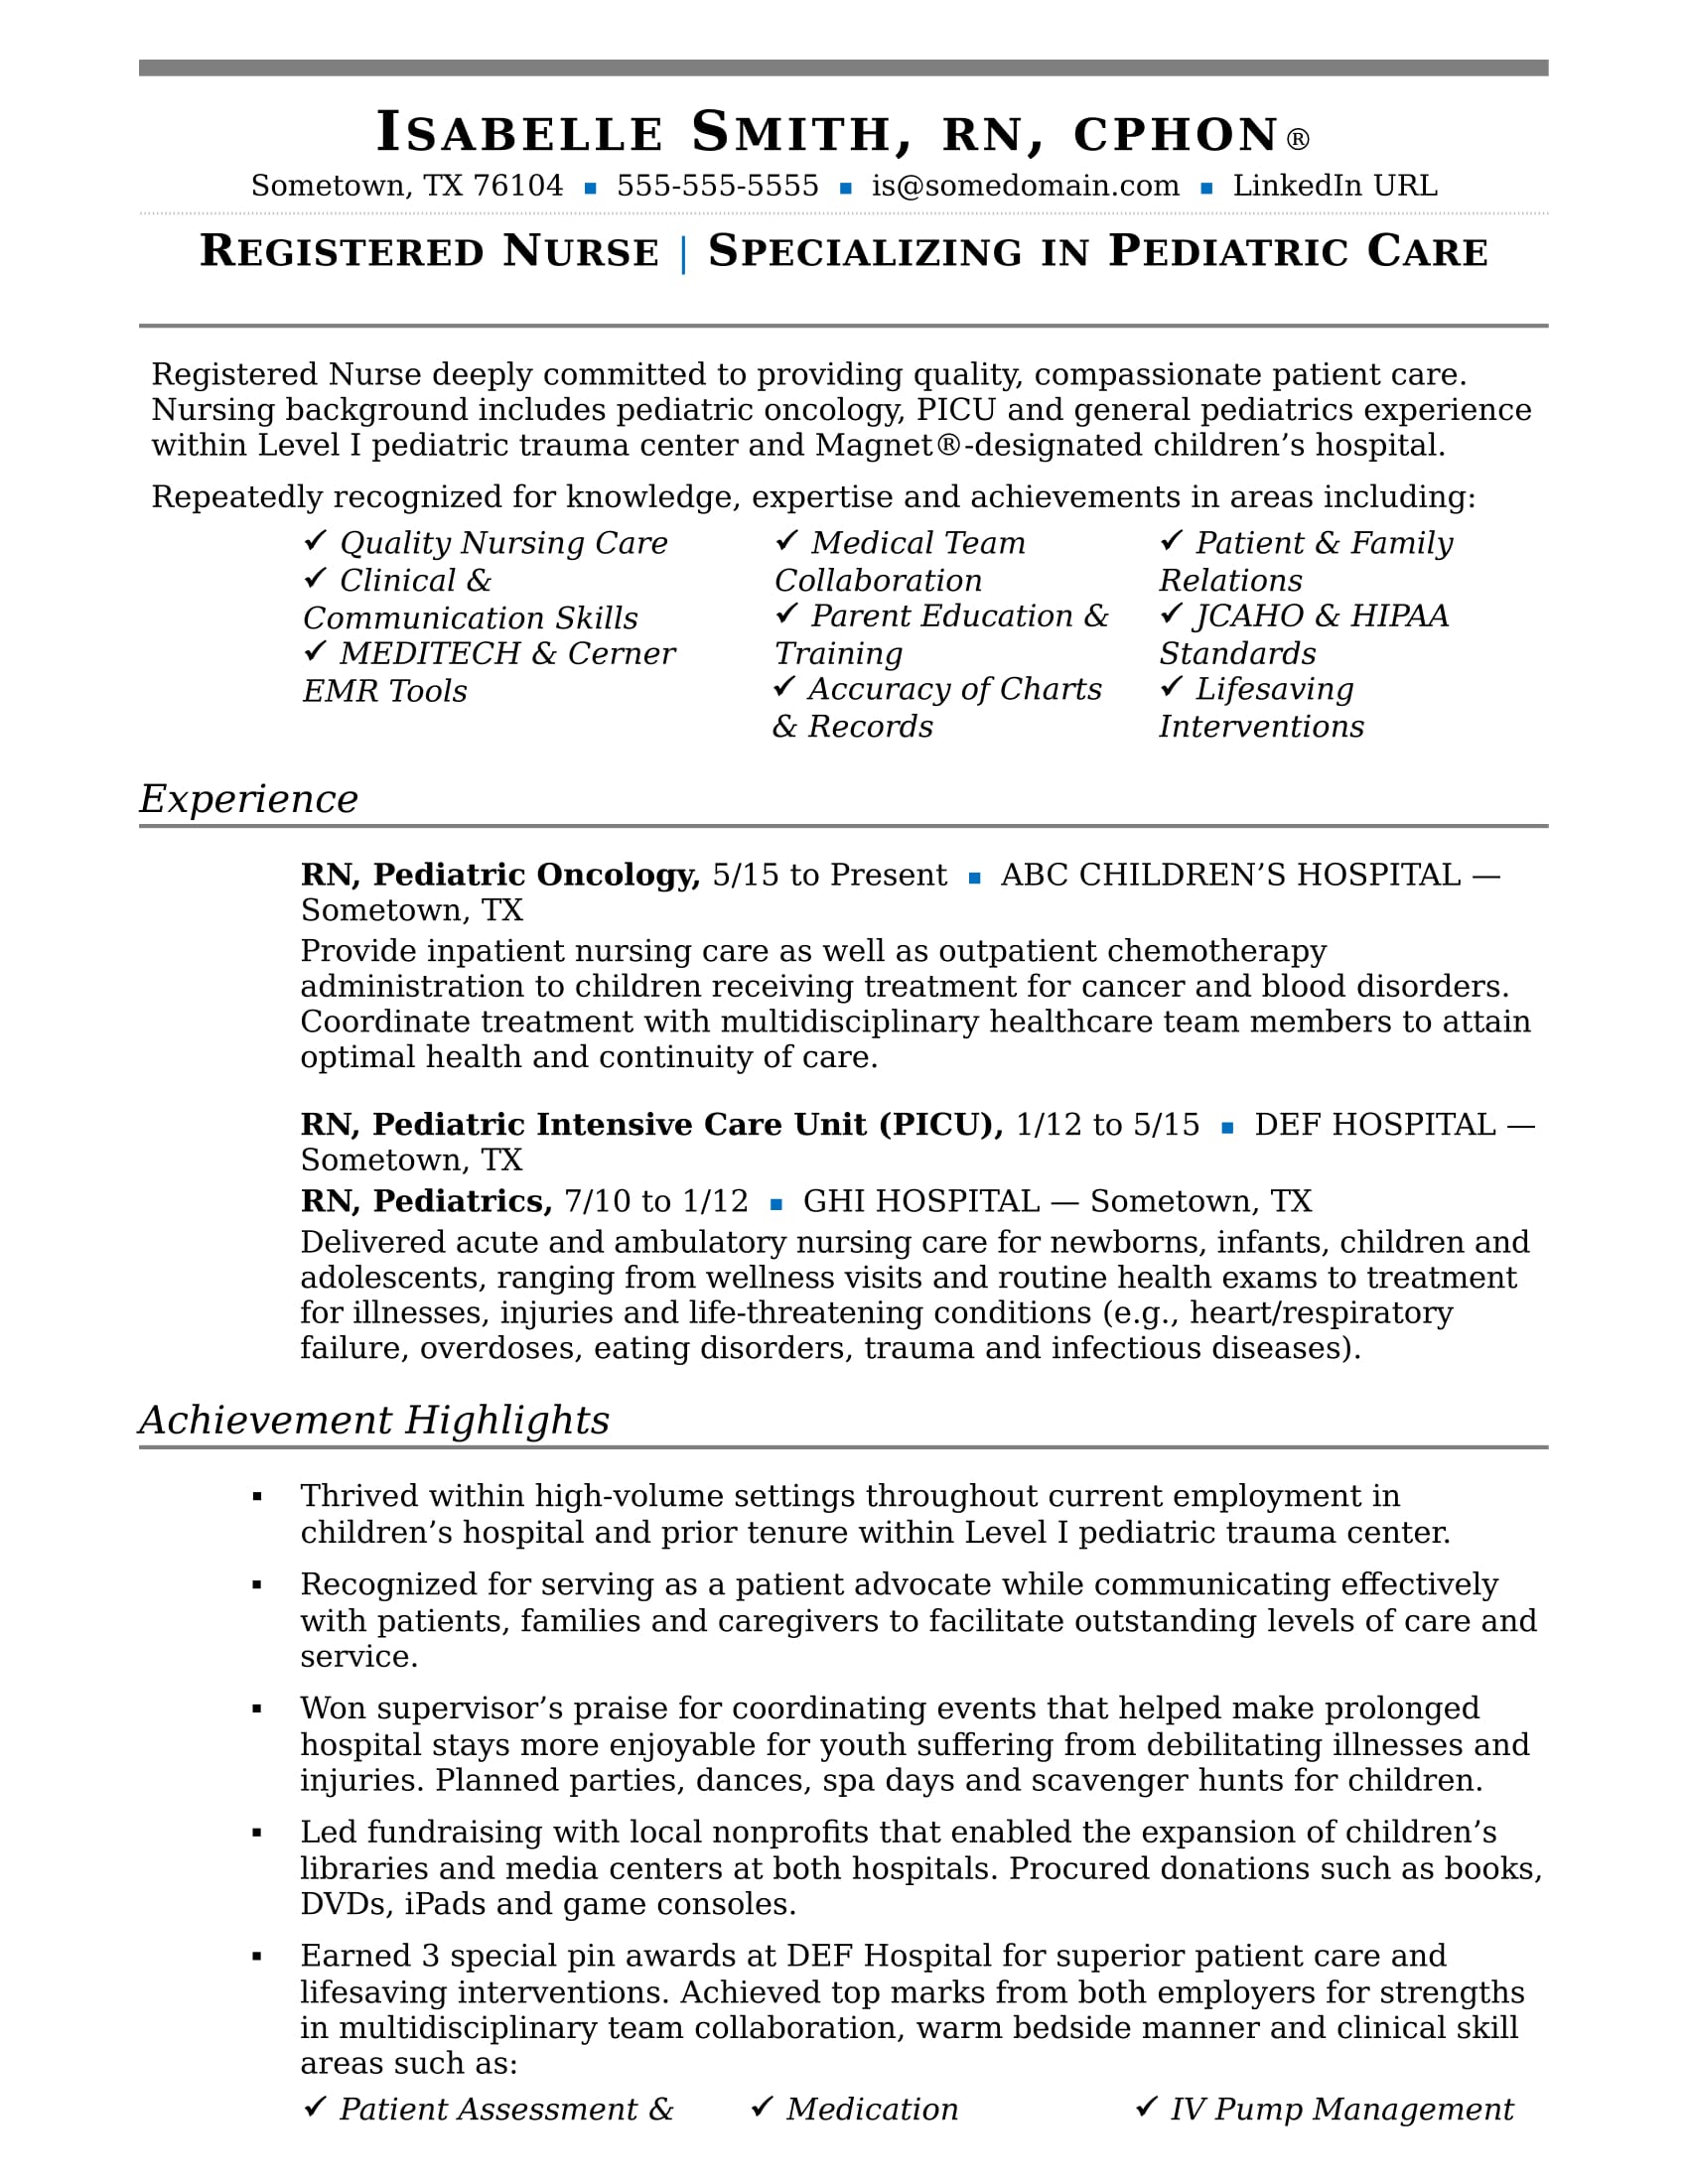 Use resume To Make Someone Fall In Love With You